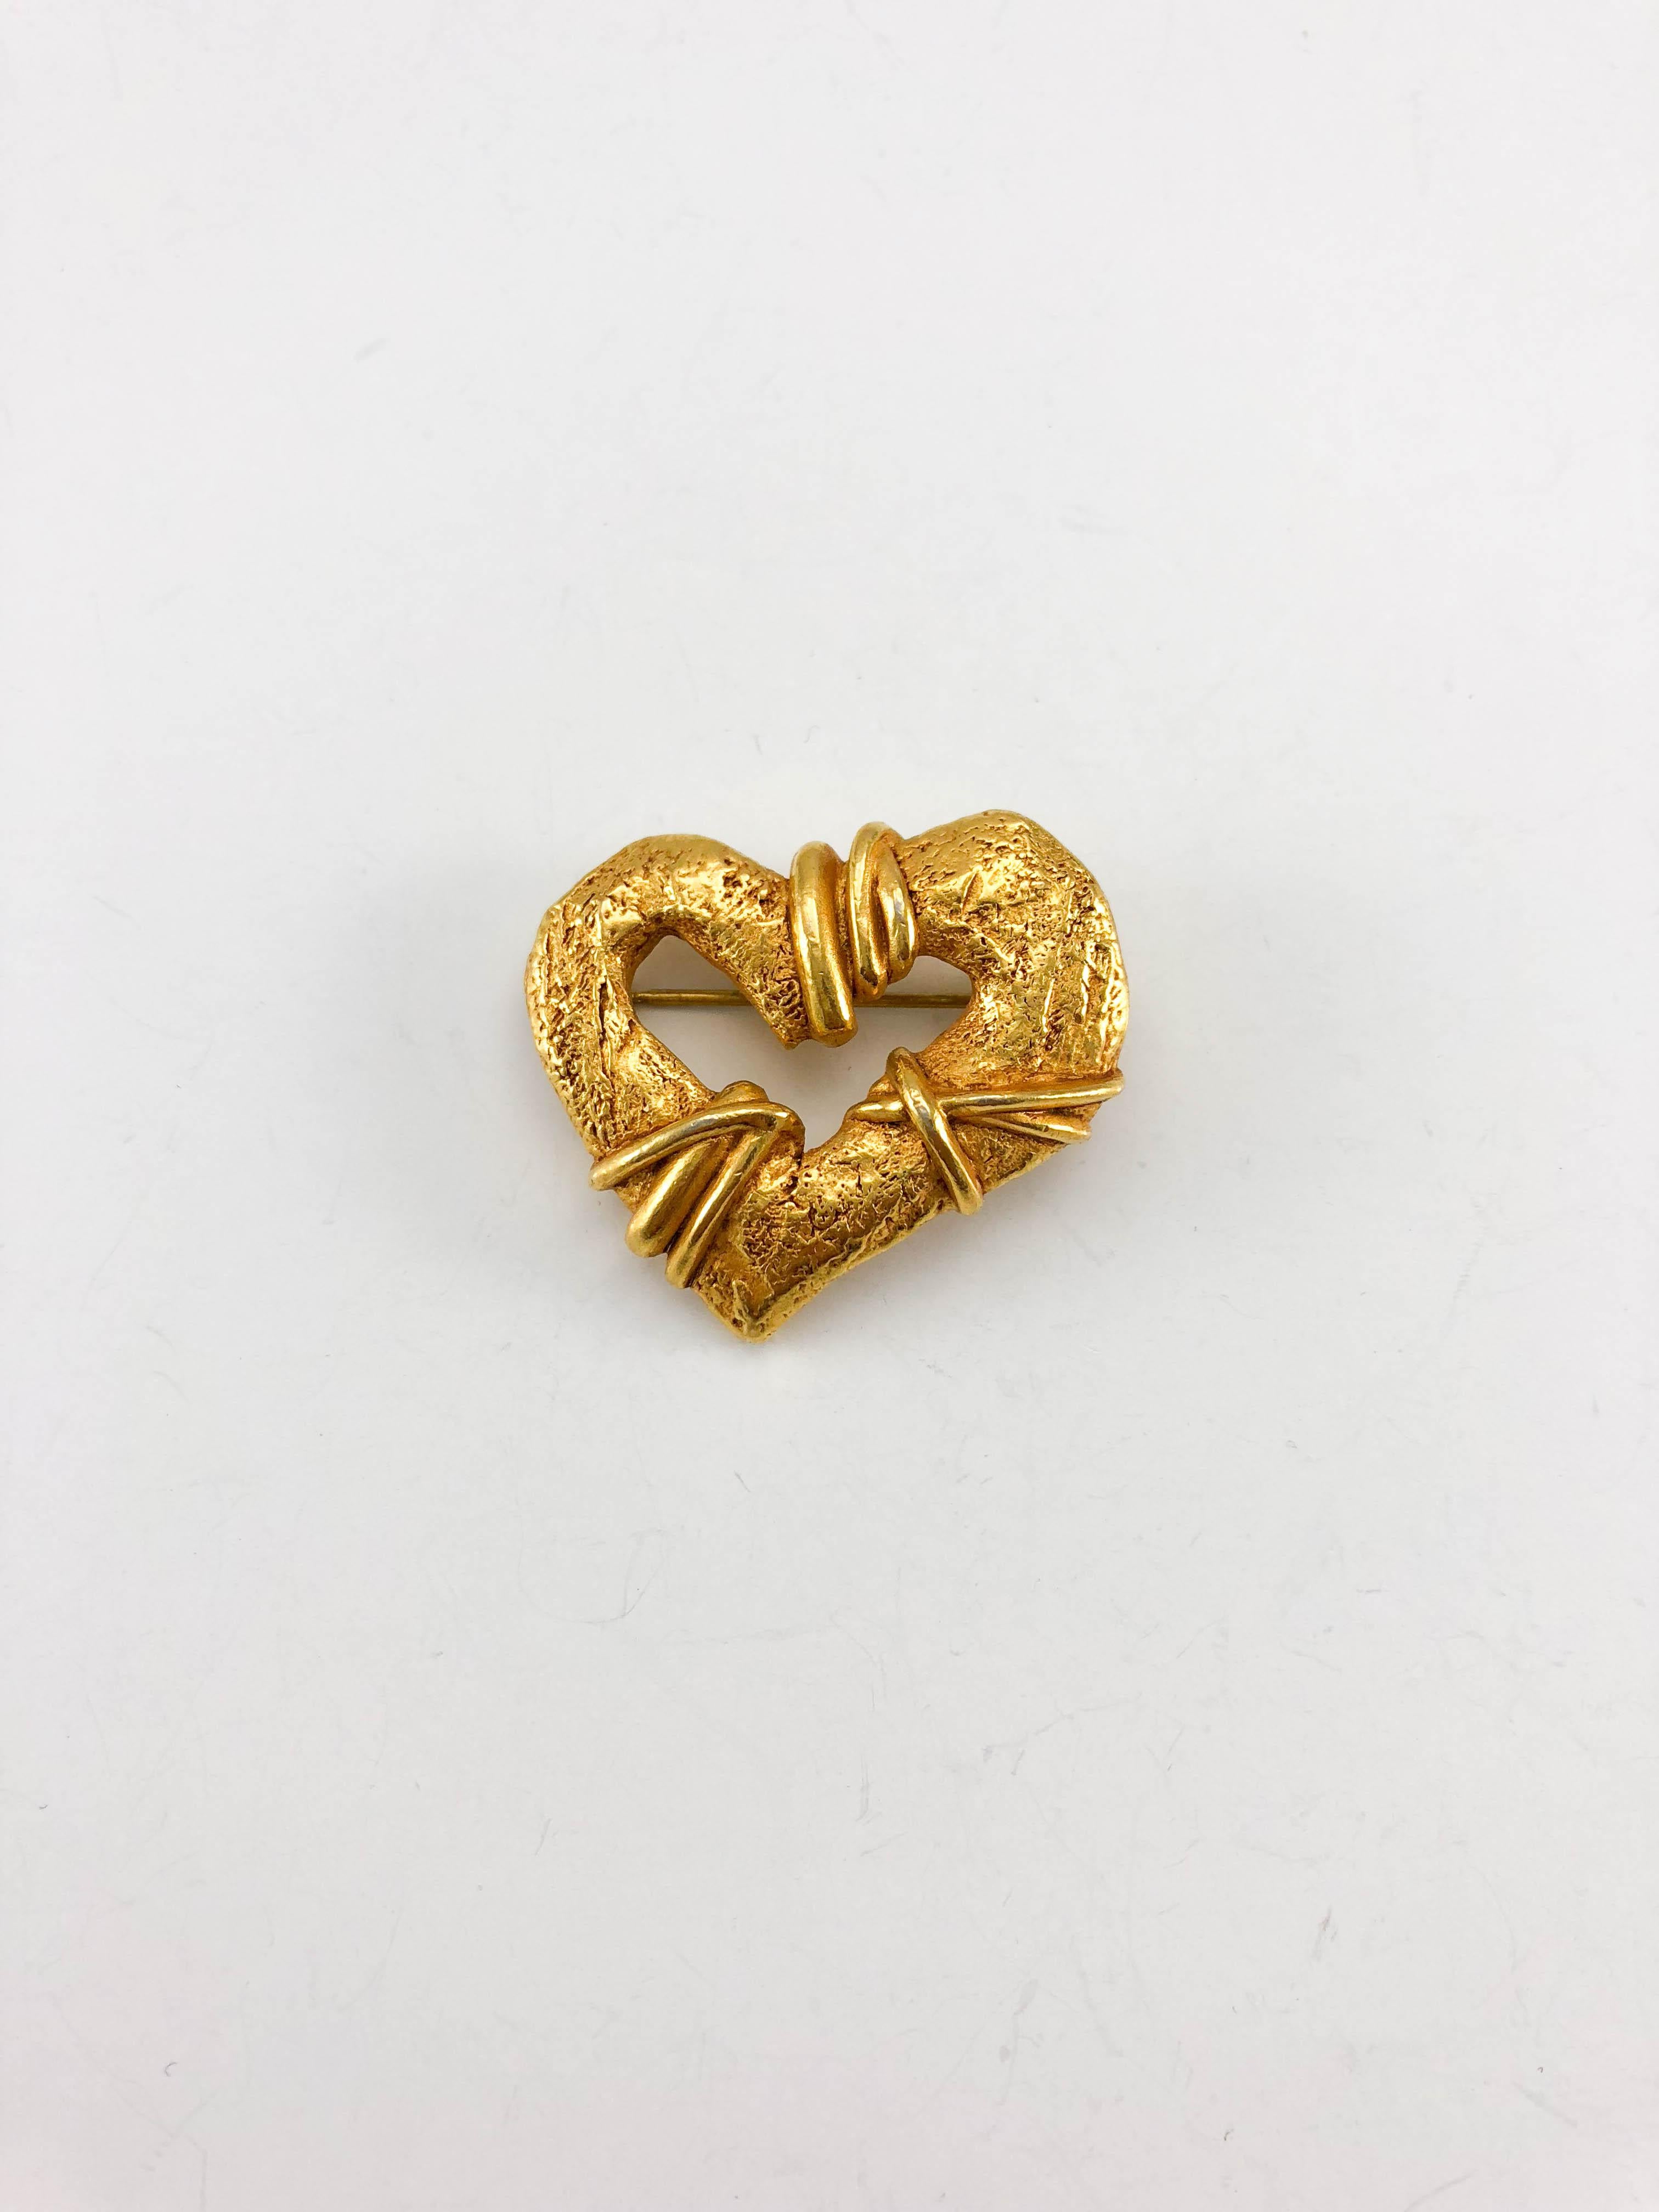 Vintage Lacroix Gold-Plated Heart Brooch. This beautiful brooch by Christian Lacroix was crafted for the 1994 Spring / Summer Collection by Robert Goossens. Made in gold-plated metal, it is shaped like a heart. The look and feel are organic.